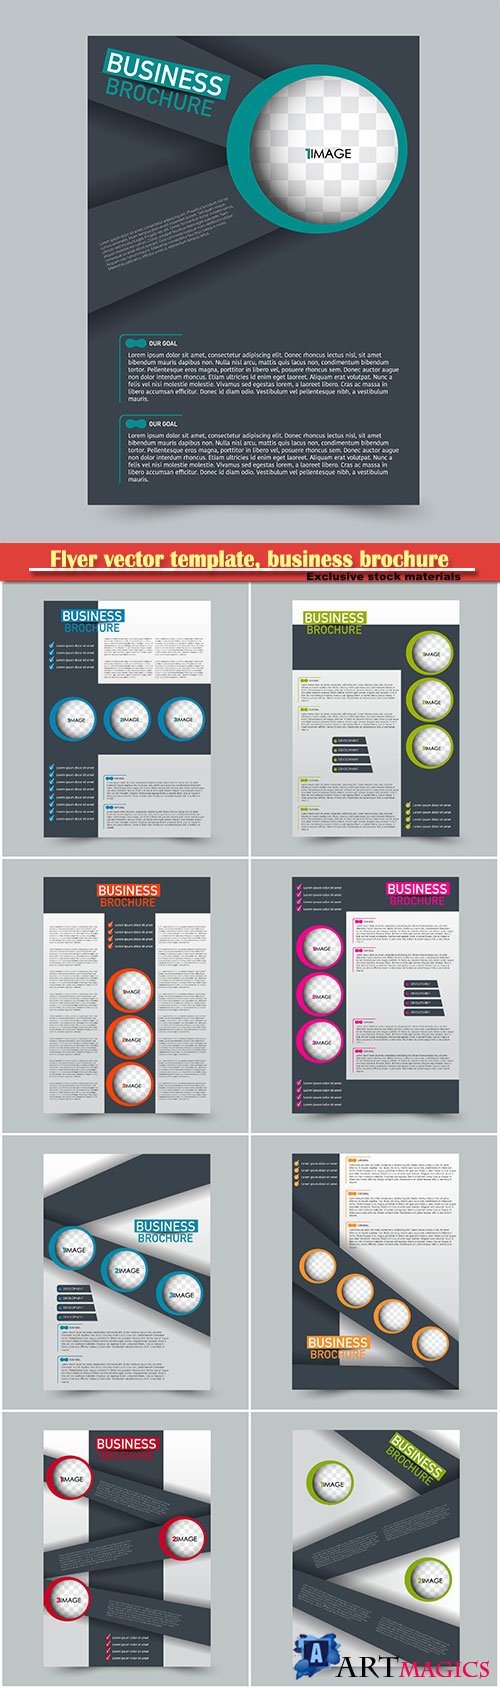 Flyer vector template, business brochure, magazine cover # 13